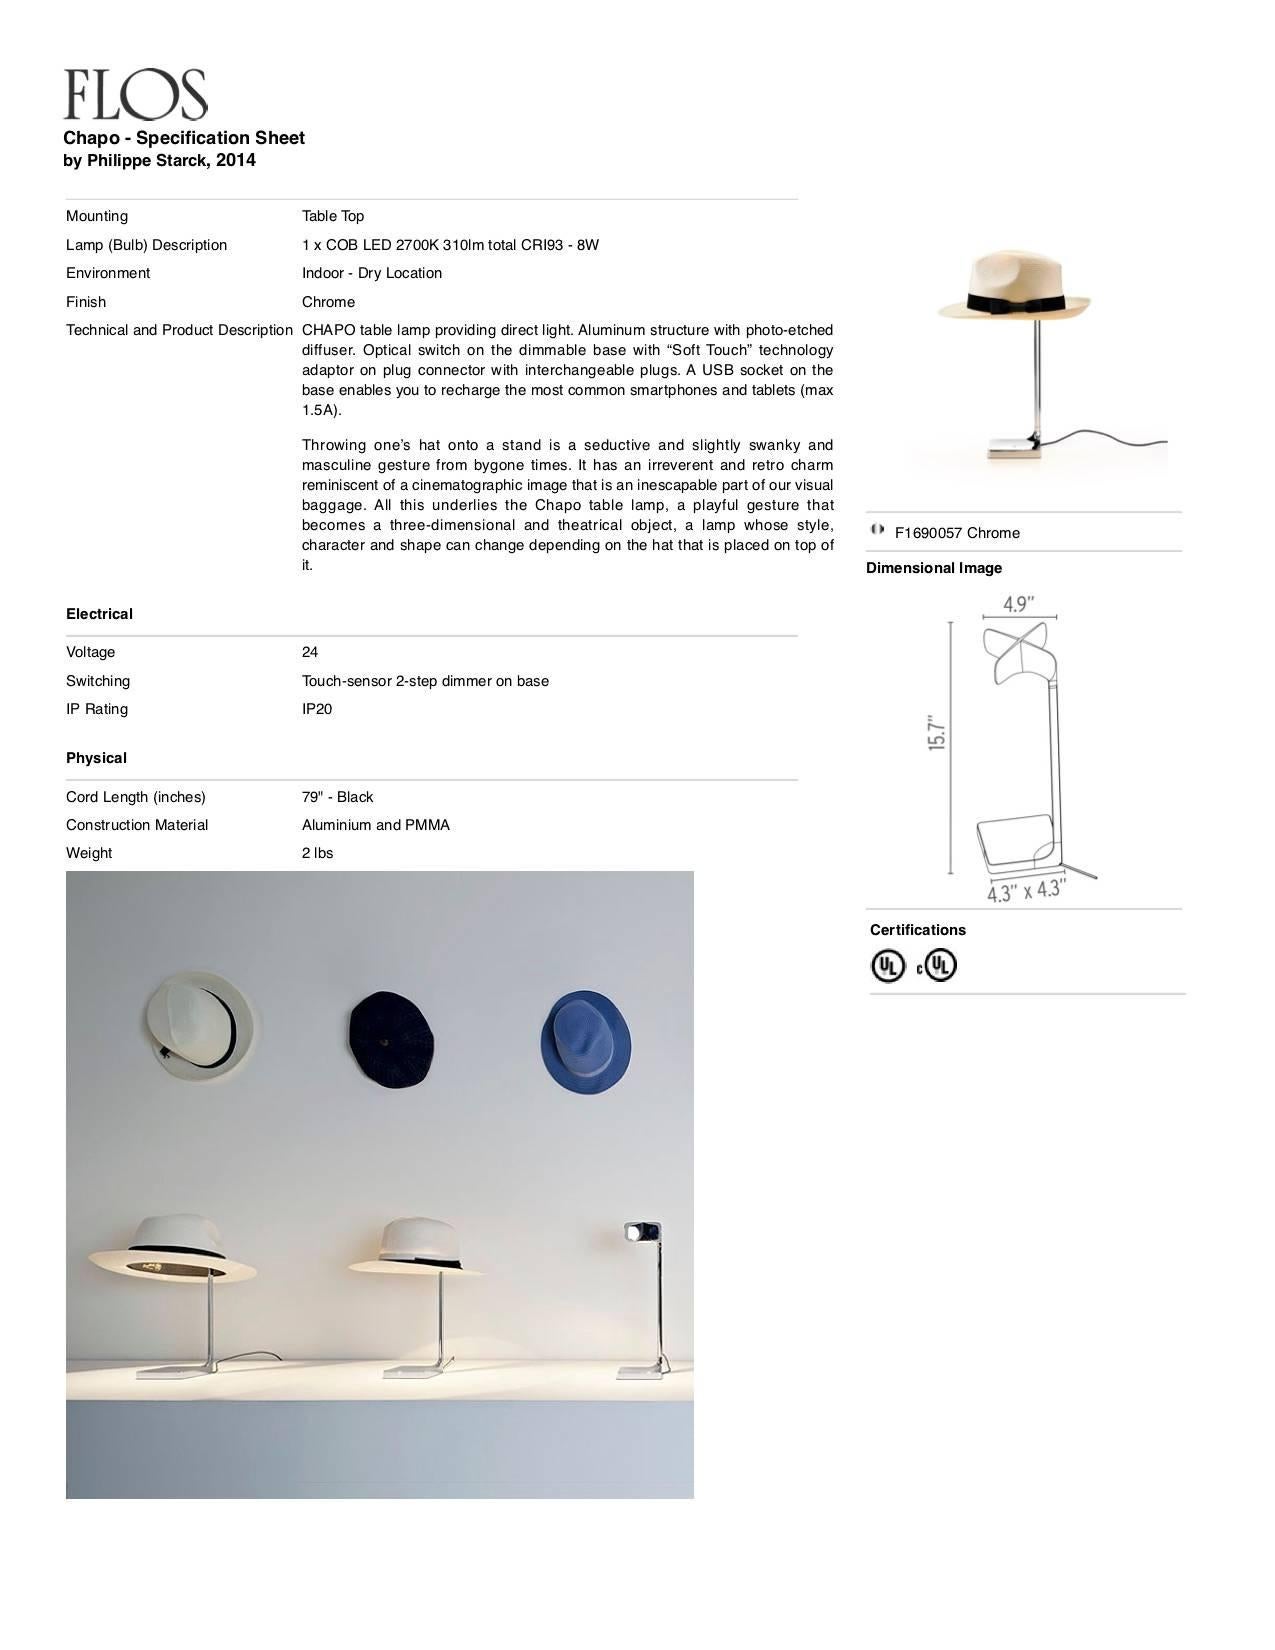 Modern FLOS Chapo Table Lamp by Philippe Starck